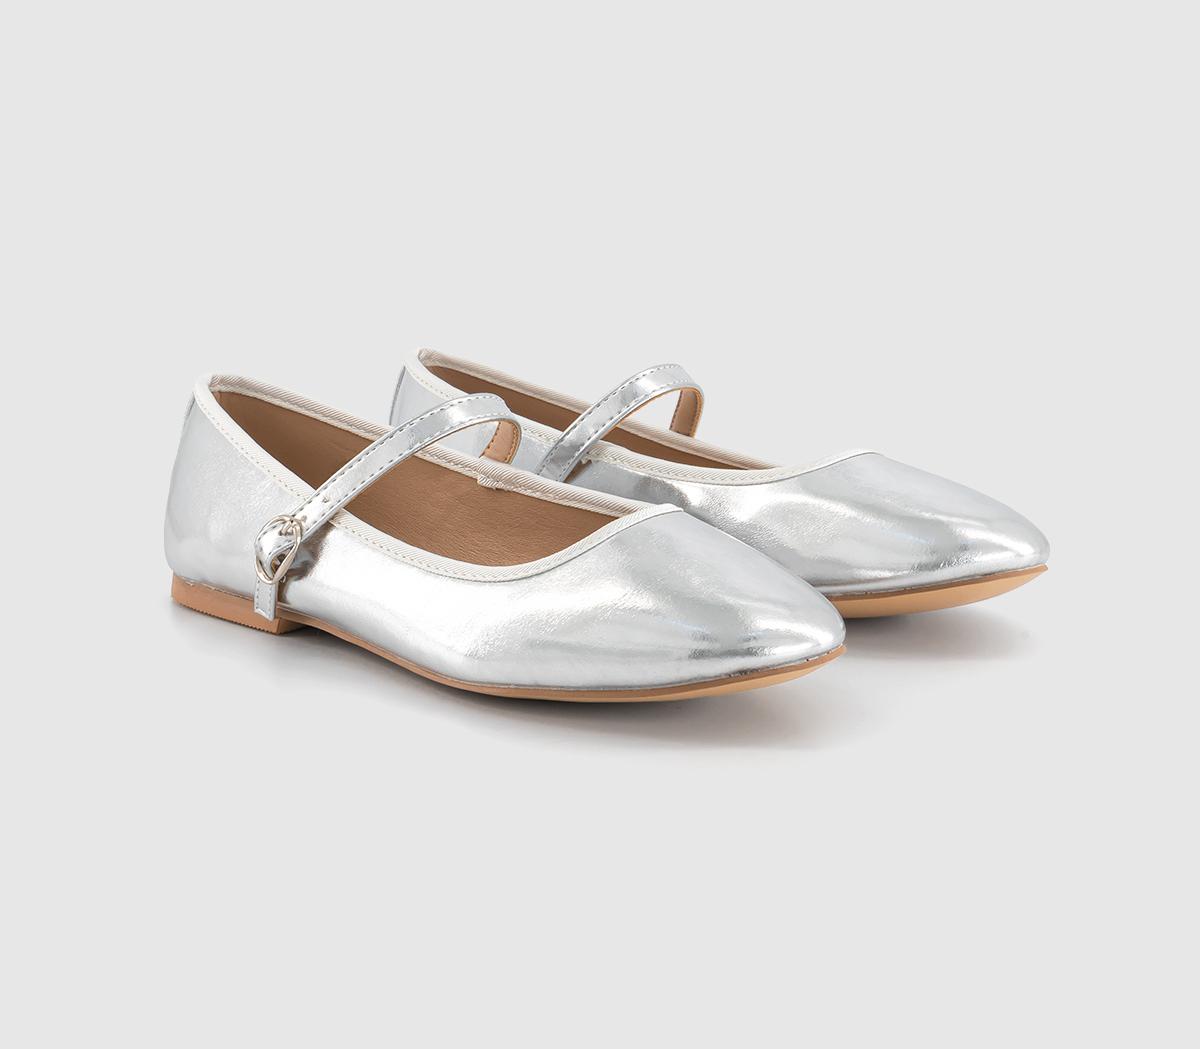 OFFICE Womens Flower Mary Jane Ballerina Shoes Silver, 7